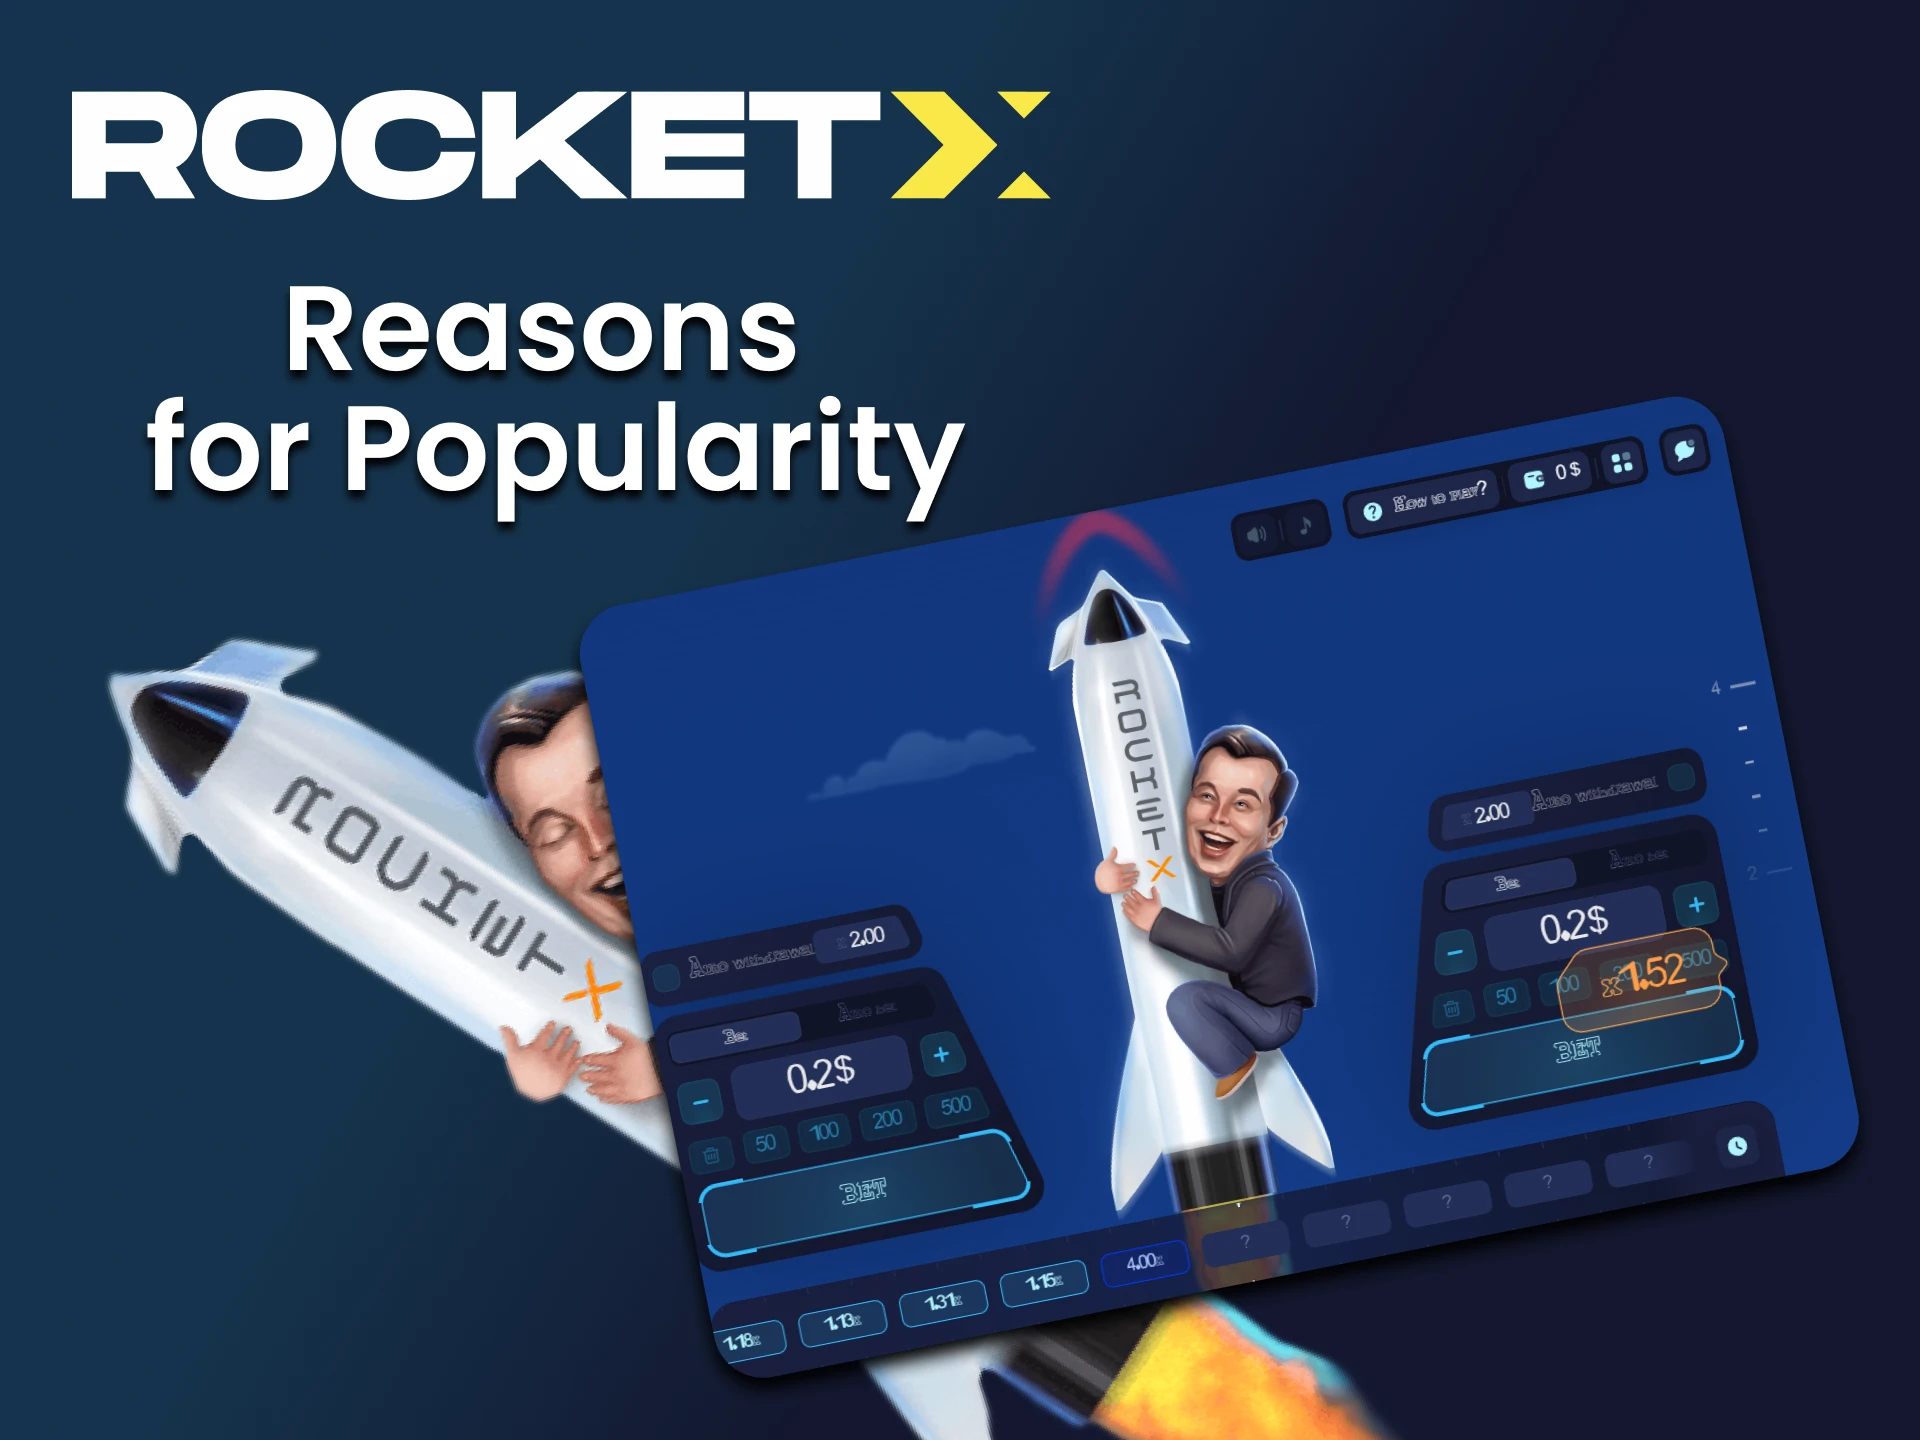 Find out why Rocket X is so popular.